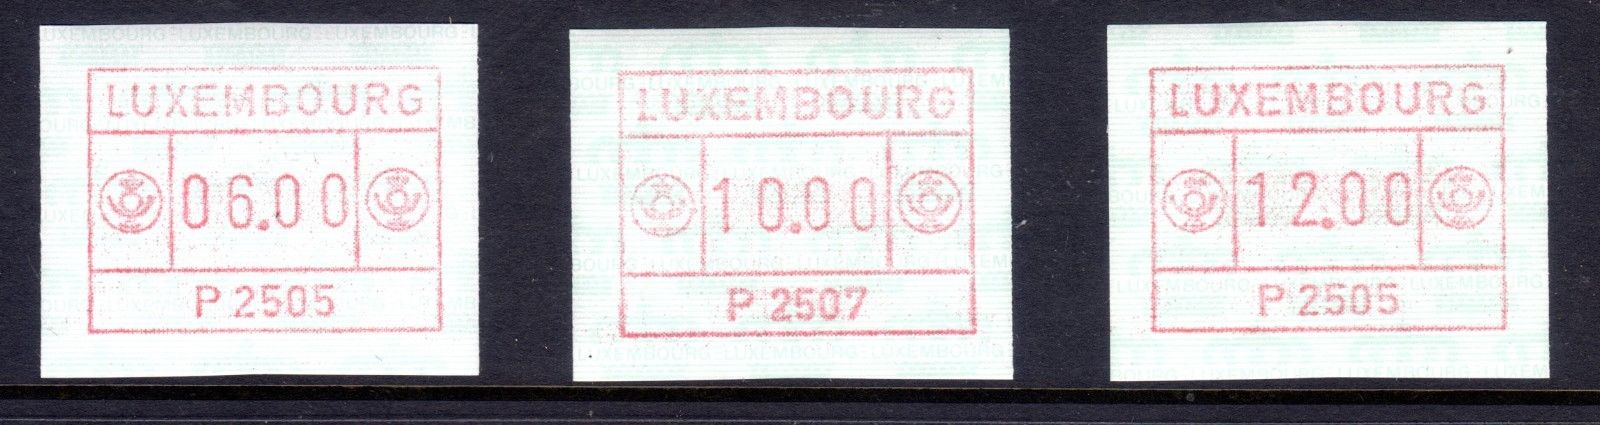 LUXEMBOURG FRAMA SET OF 3 MINT UNMOUNTED